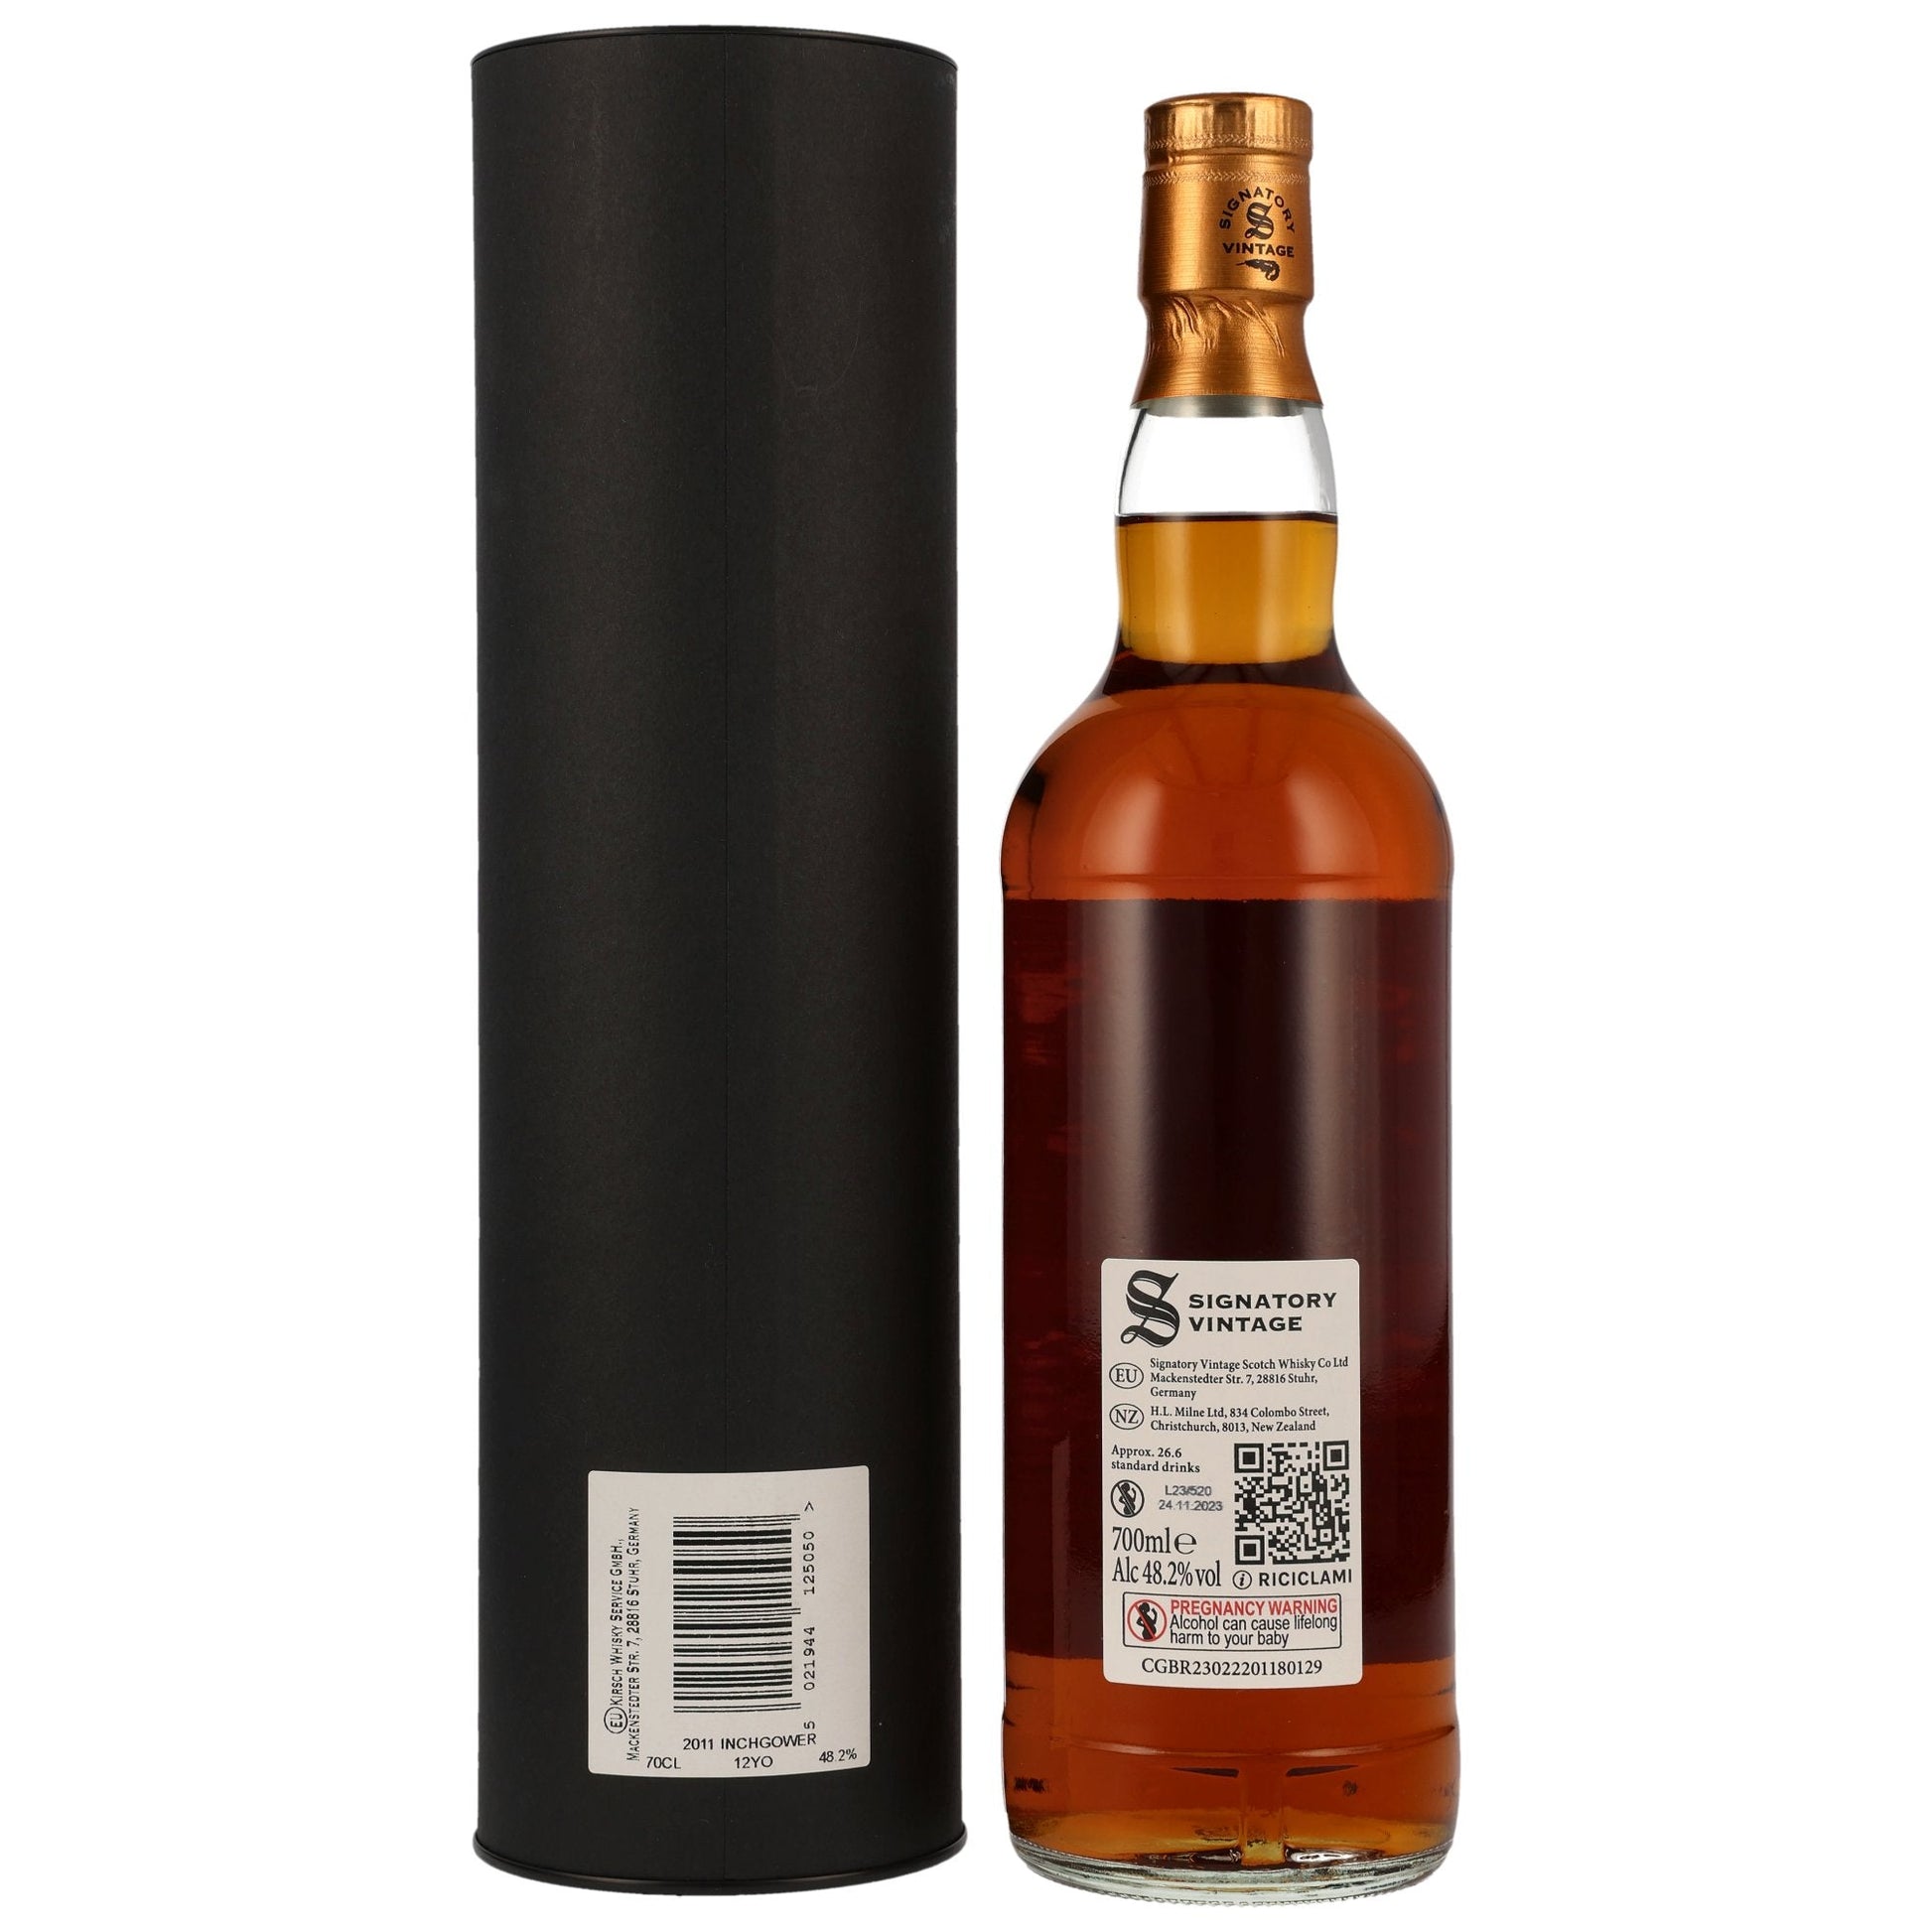 Inchgower | 12 Jahre | 2011/2023 | Signatory Vintage | Small Batch Edition #3 | 48,2%GET A BOTTLE